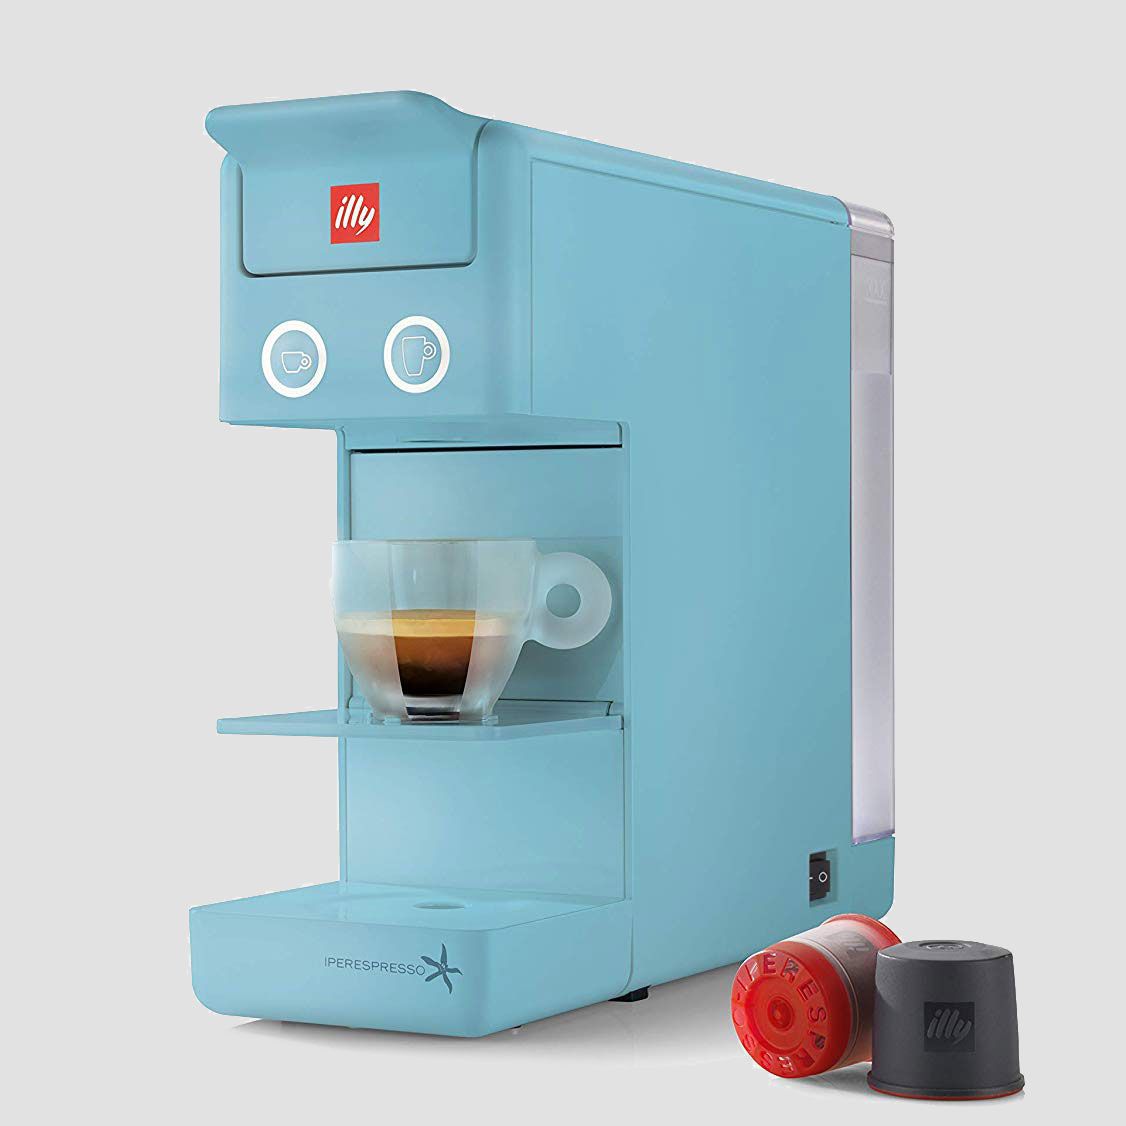 Illy Y3.2 iperEspresso and Coffee Machine